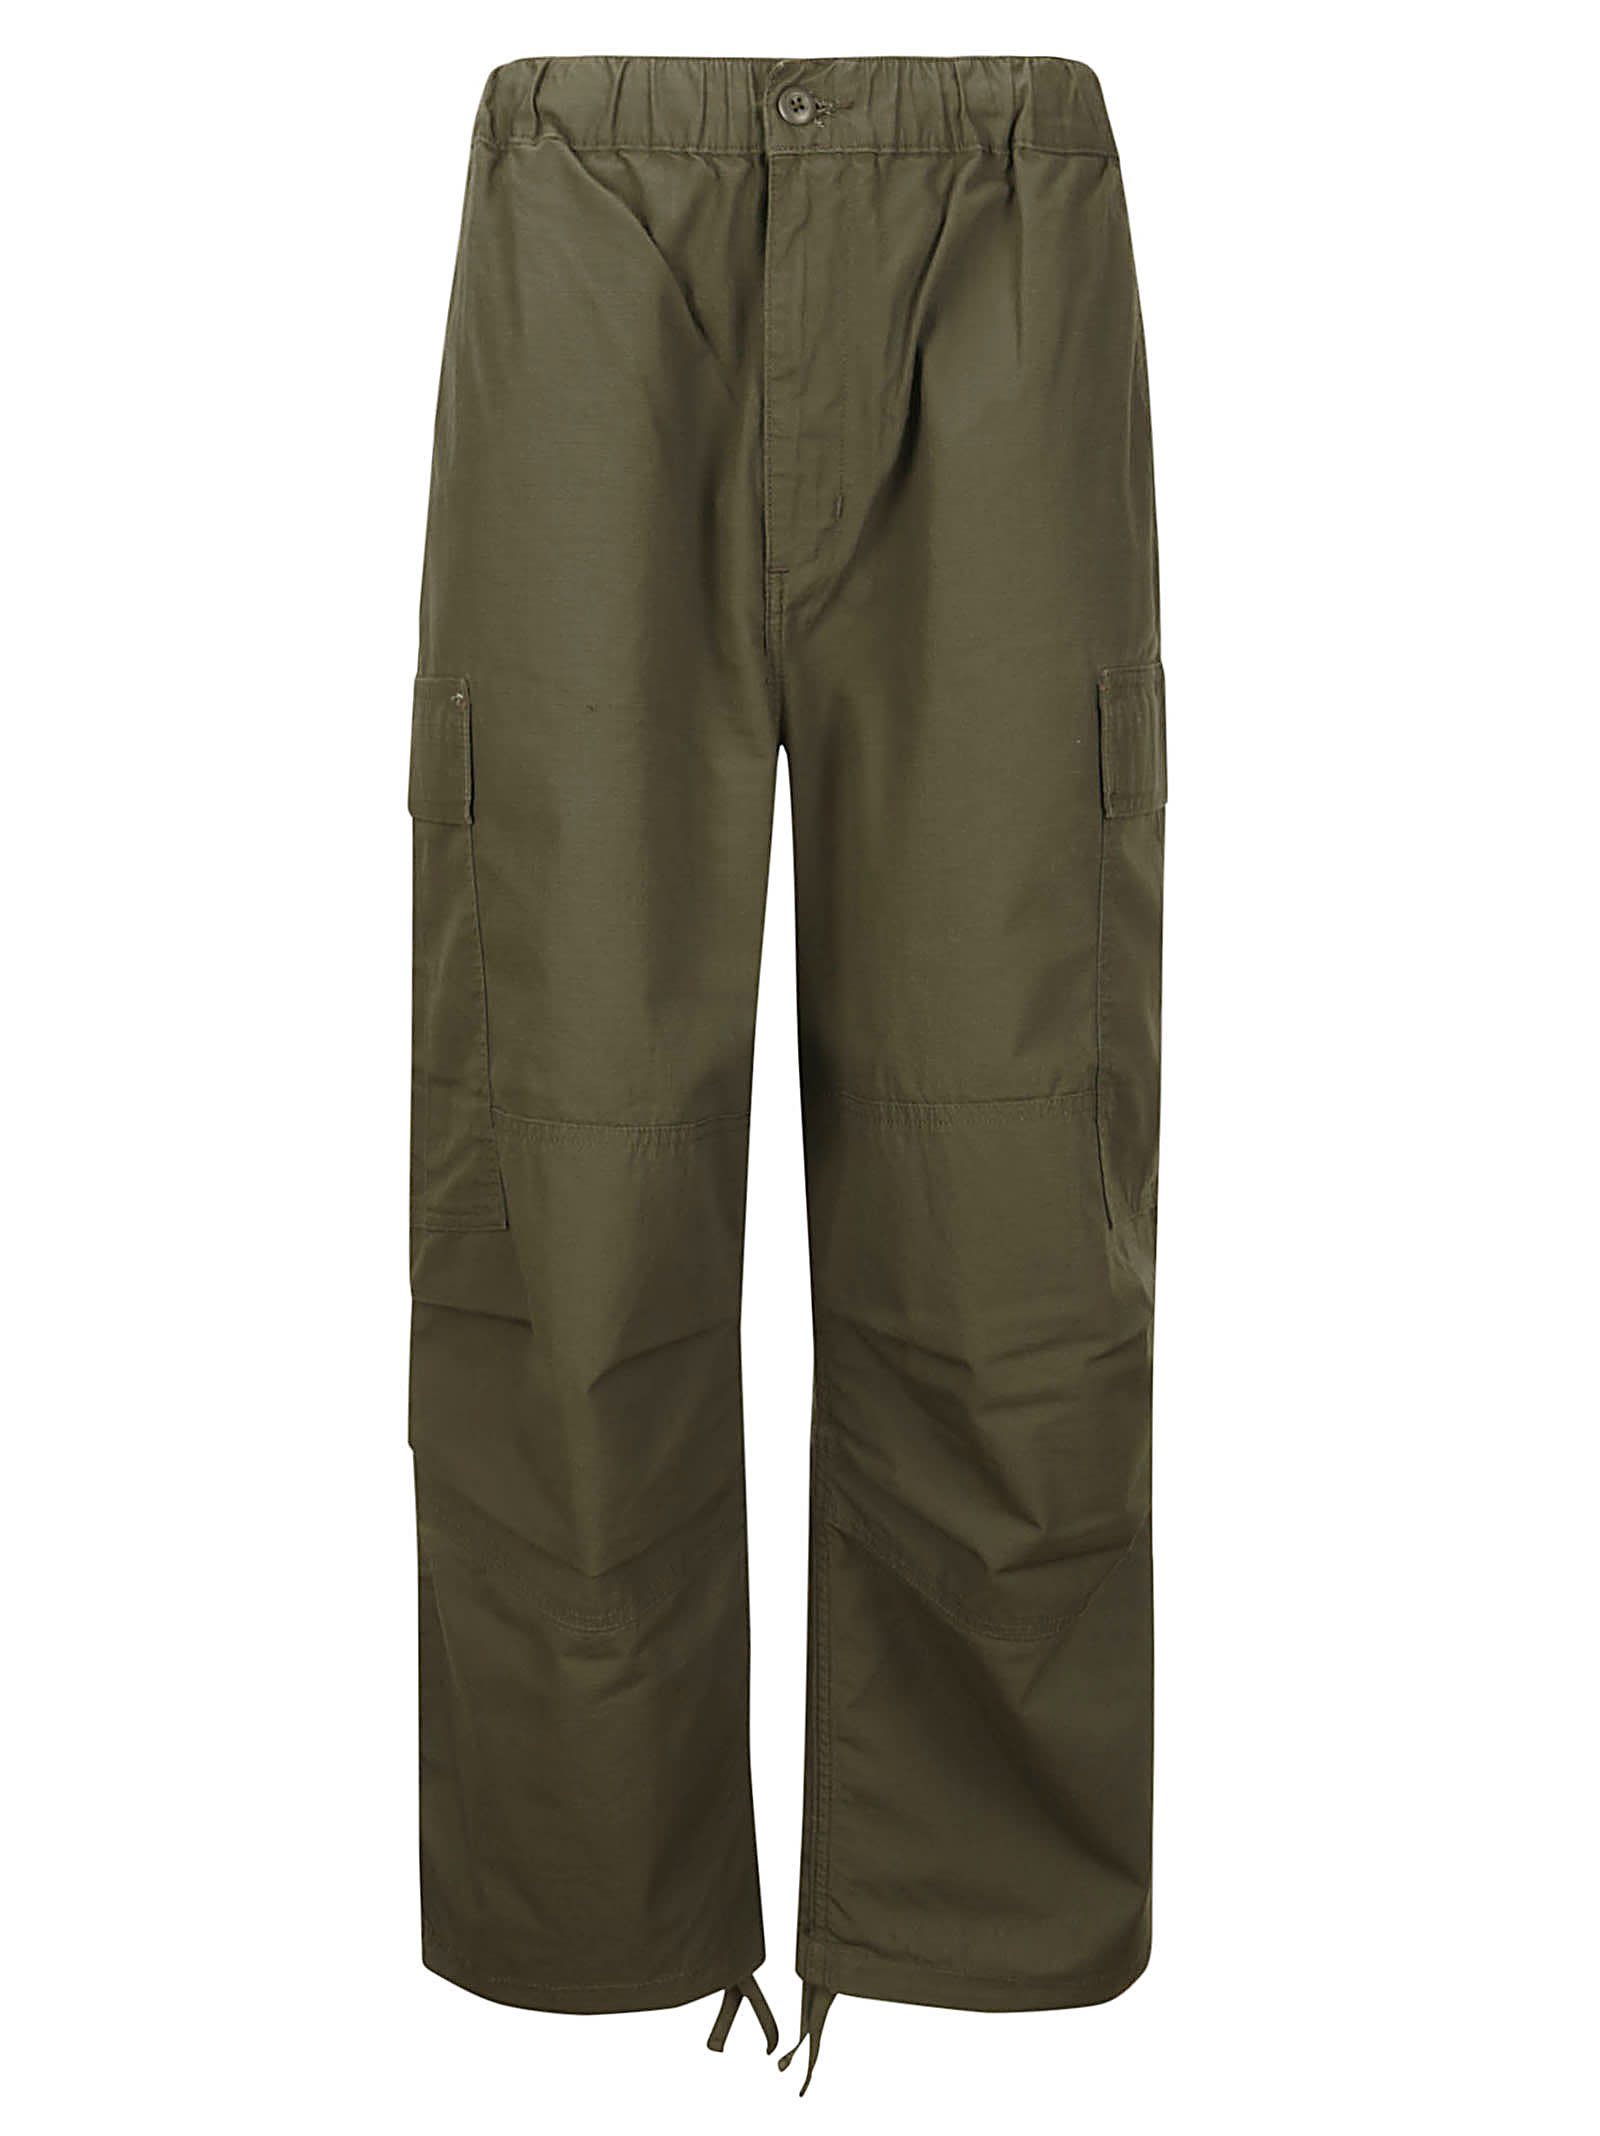 Carhartt Jet Cargo Pant columbia Ripstop - 0RINSED CYPRESS - female - Size: Extra Small